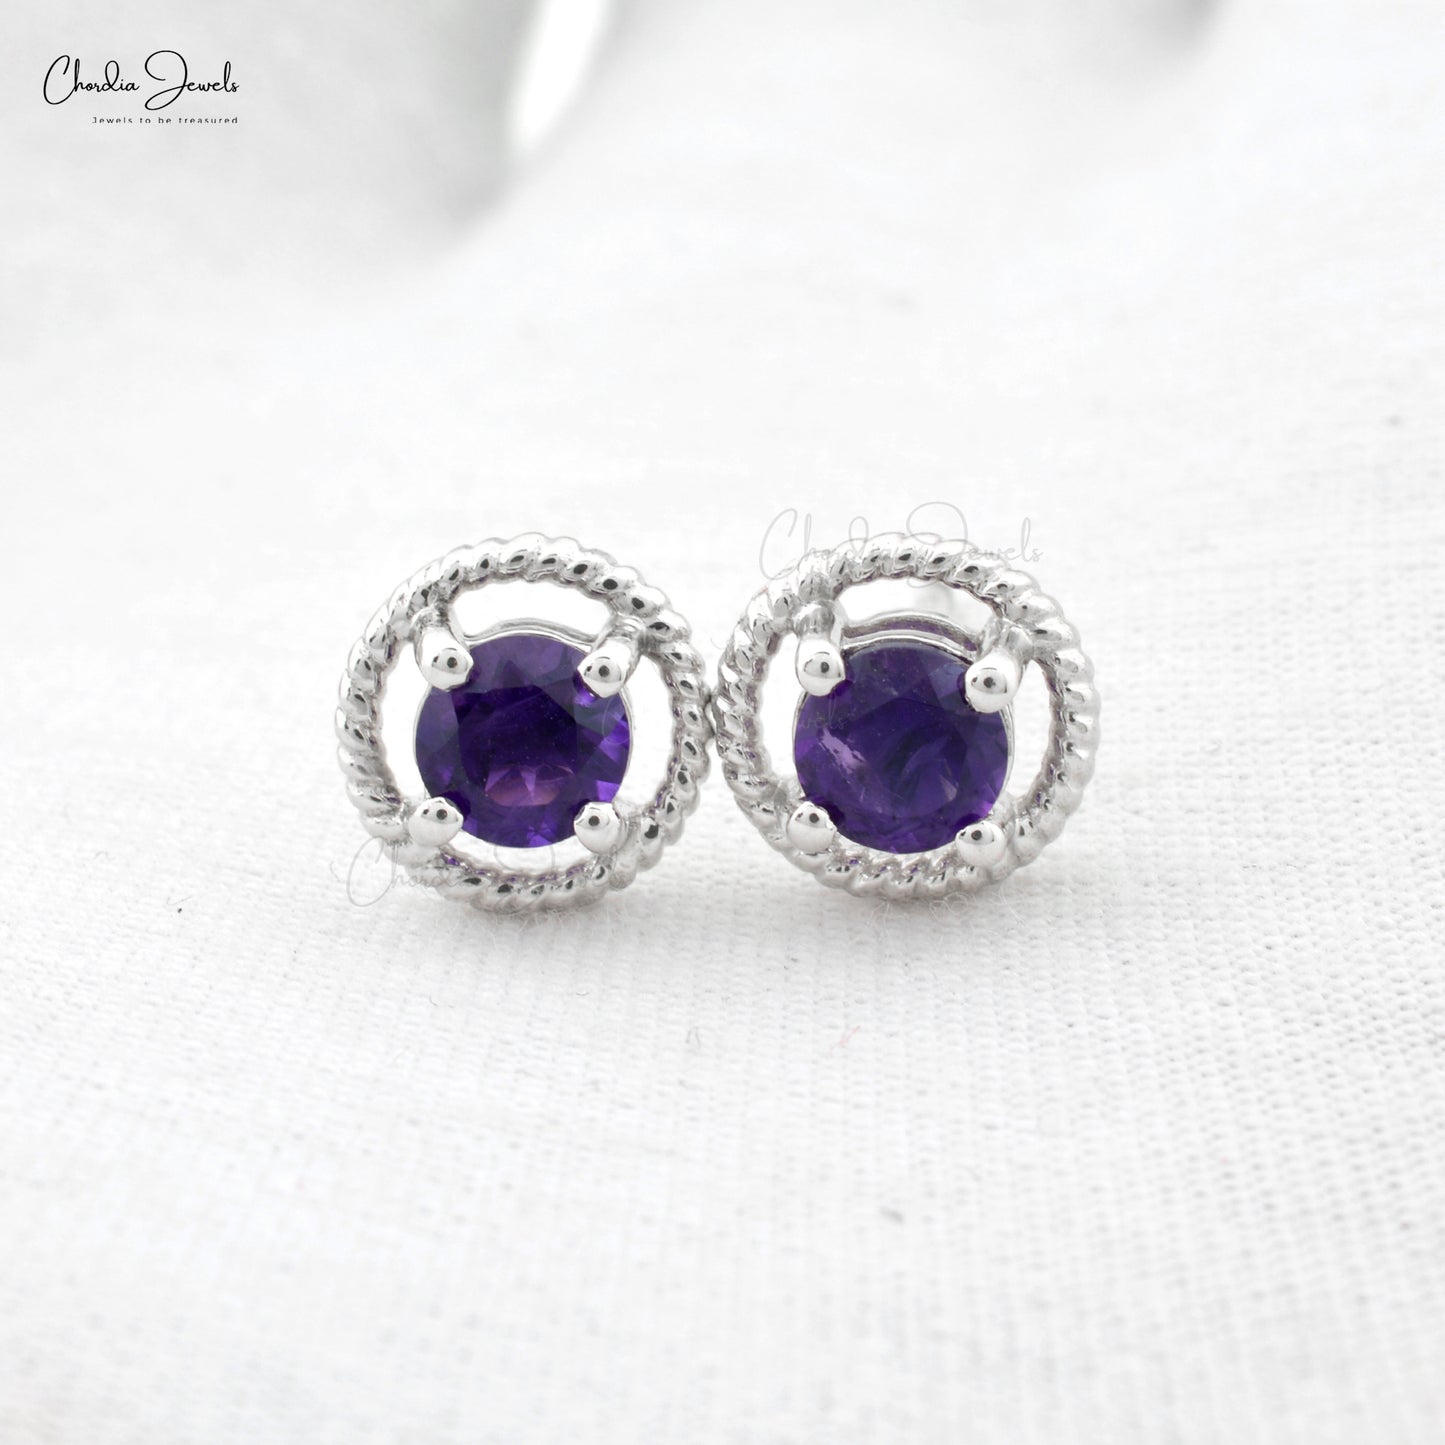 Beautiful Authentic Purple Amethyst Stylish Halo Spiral Studs Round Brilliant Cut Gemstone Stud Earrings in 14k Real White Gold Gift For Her